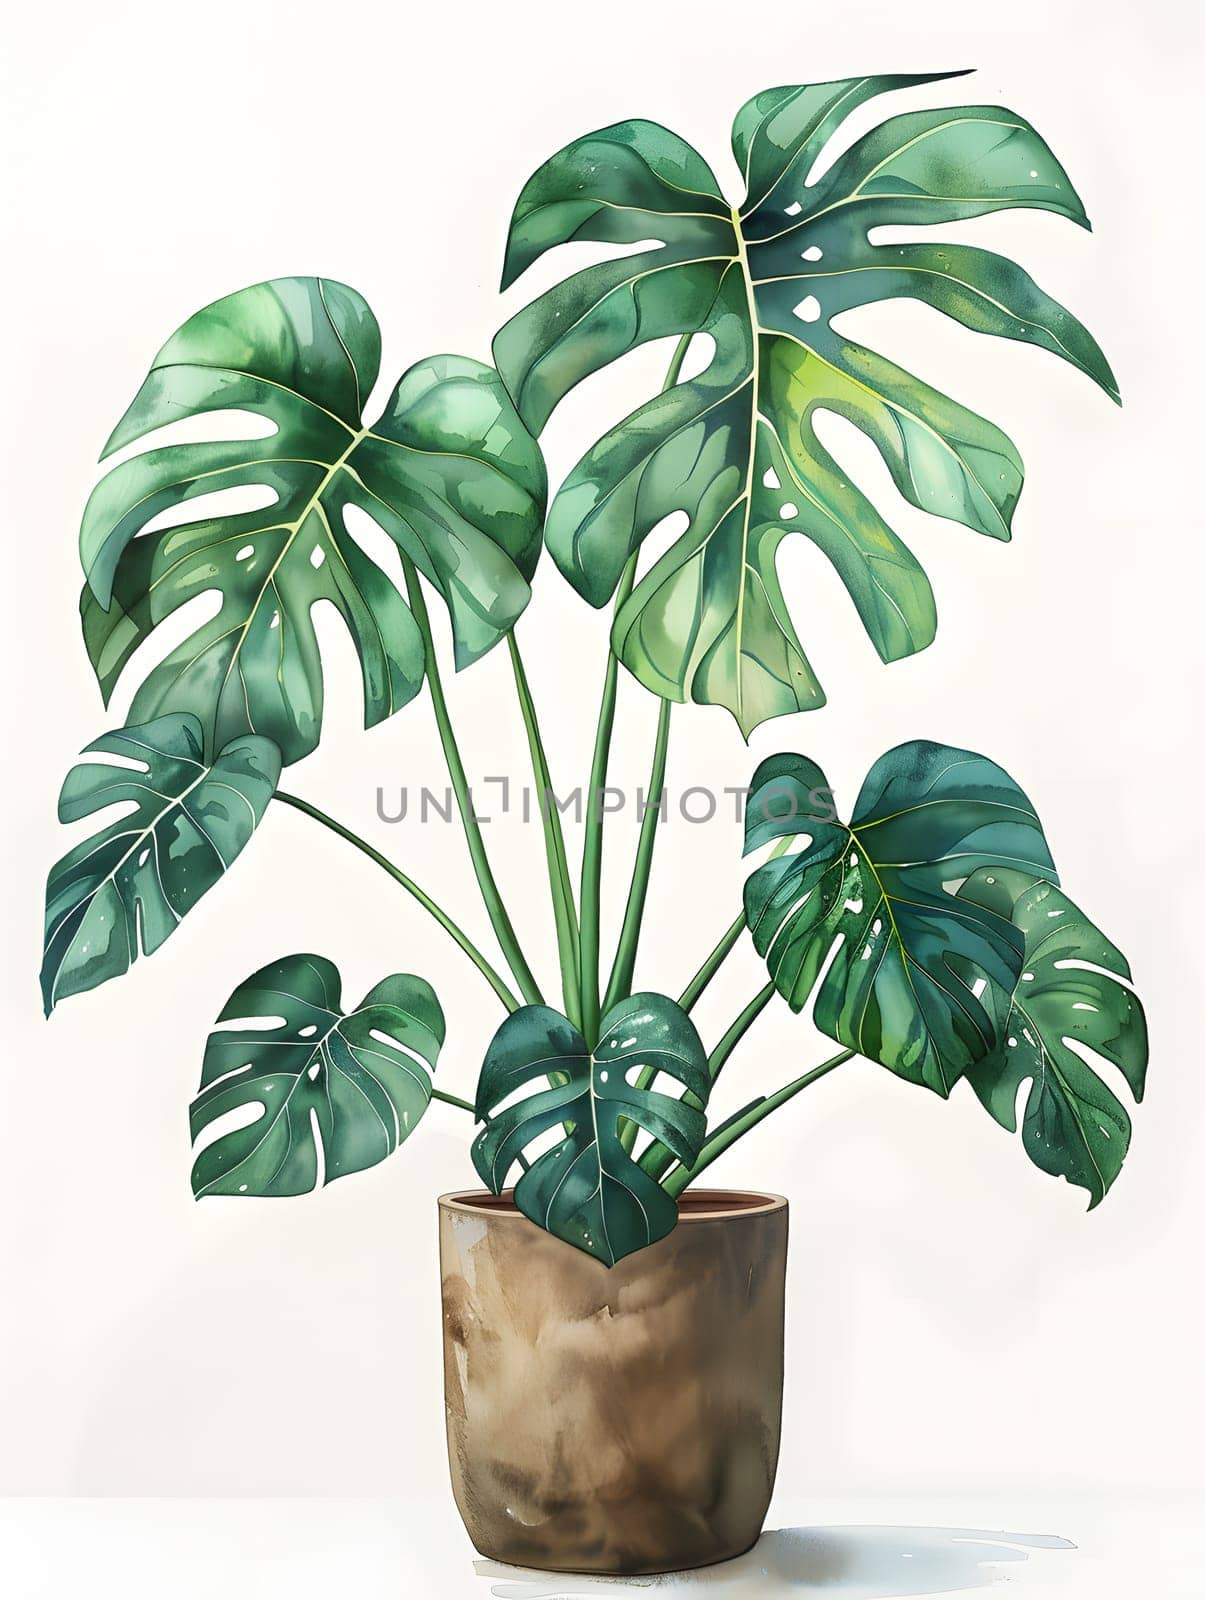 A stunning painting of a monstera houseplant in a flowerpot on a clean white background. This art piece beautifully captures the essence of nature and adds a touch of greenery to any space